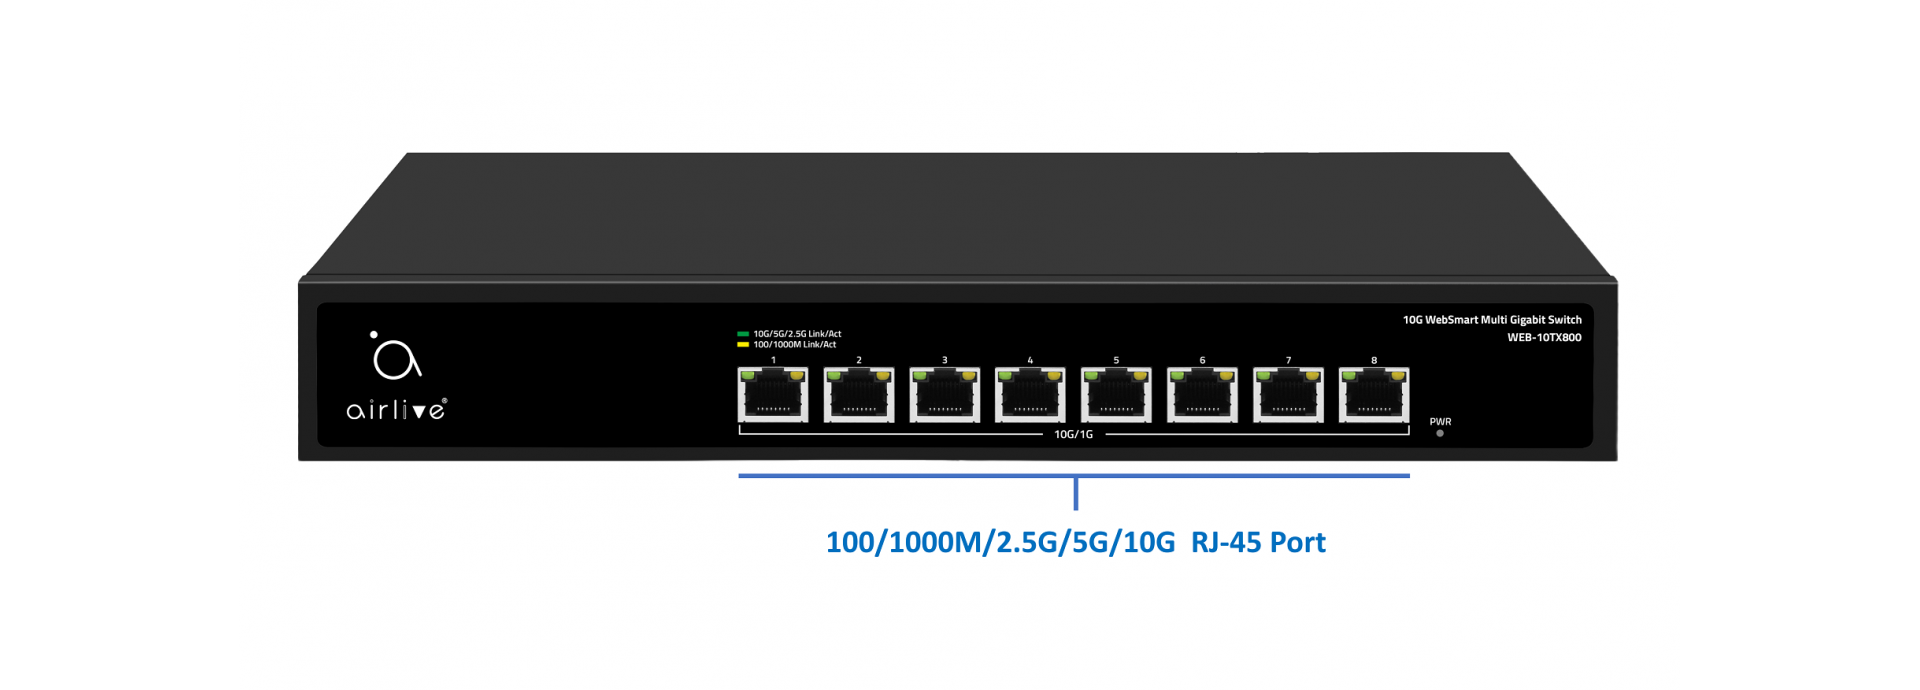 Upgrading your Network Connection to 10G Super High speed with Web Management Switch